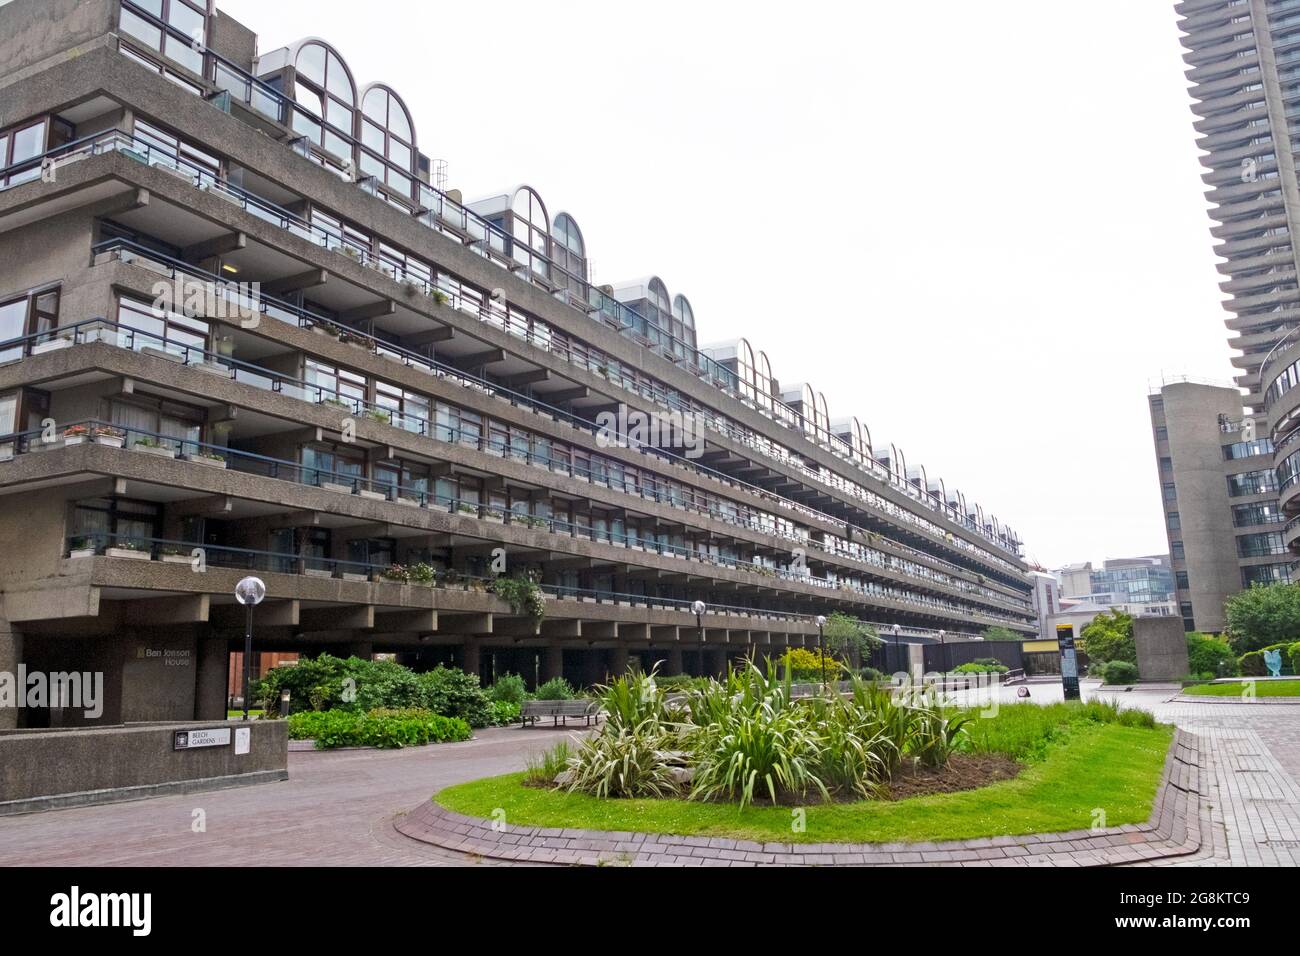 Ben Jonson House view of apartments flats and garden bed on the Barbican Estate in the City of London EC2Y England UK Great Britain  KATHY DEWITT Stock Photo